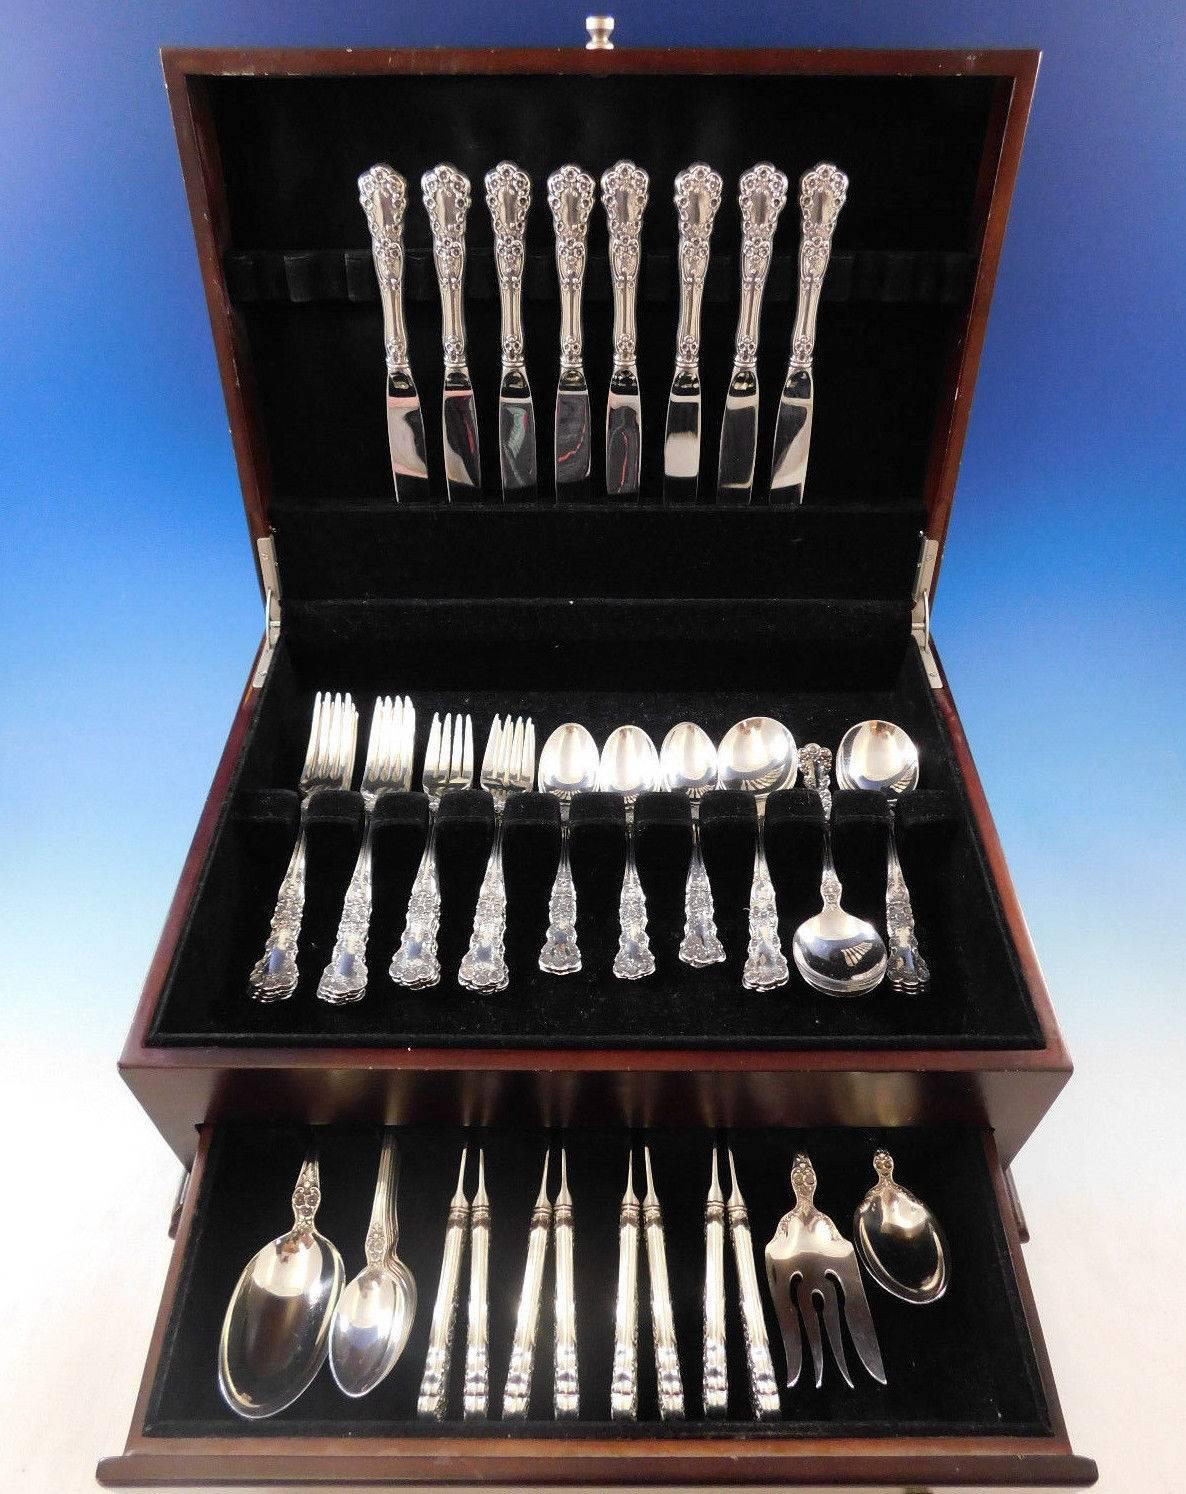 Buttercup by Gorham sterling silver flatware set - 59 pieces. This set includes:

Eight knives, 8 3/4